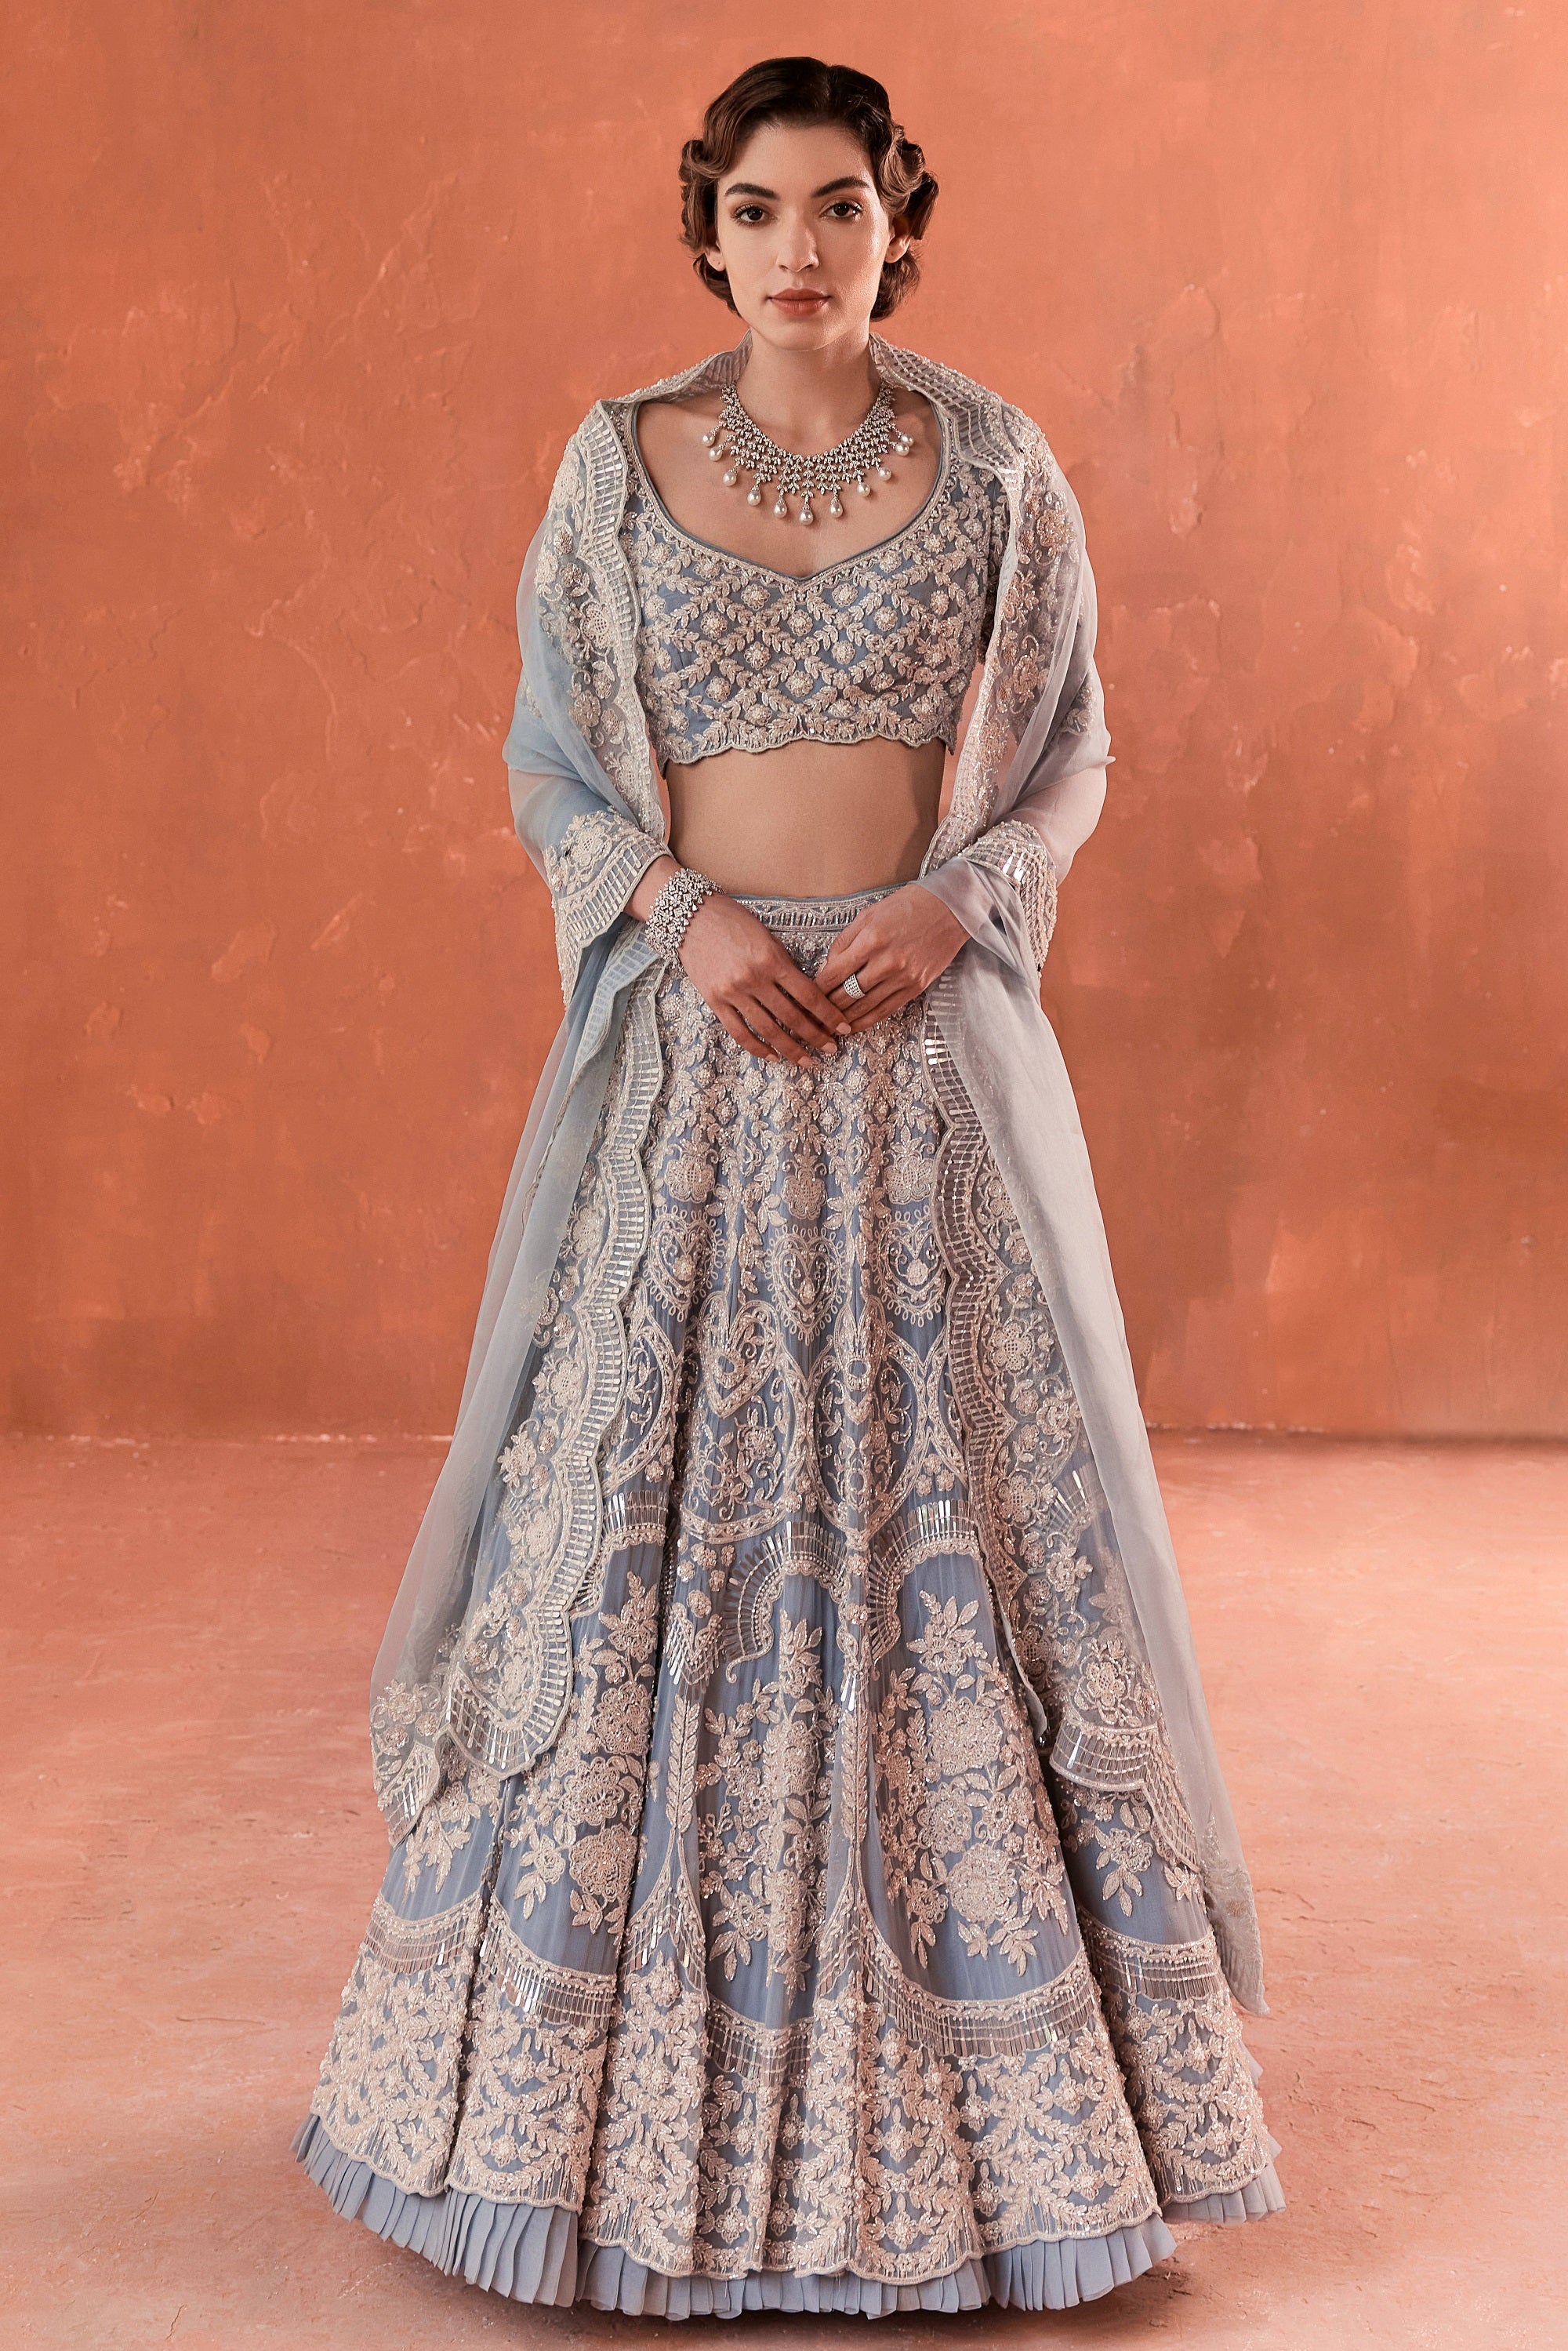 17 Different Types Of Bridal Lehengas You Can Rock On Your Most Special Day  In 2021. | Fashion Autograph